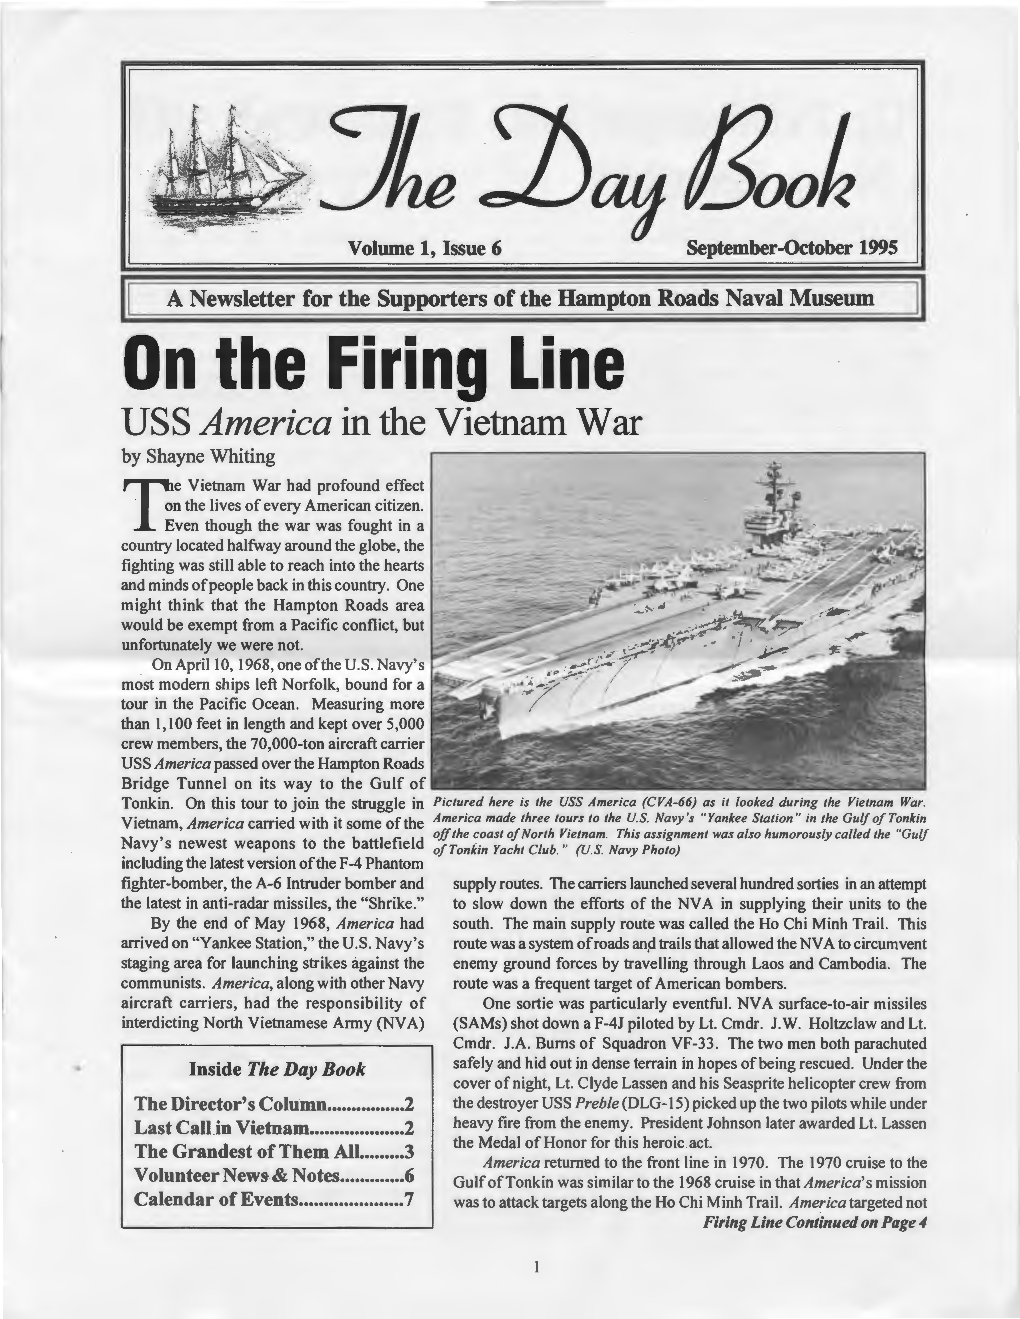 On the Firing Line USS America in the Vietnam War by Shayne Whiting E Vietnam War Had Profound Effect N the Lives of Every American Citizen